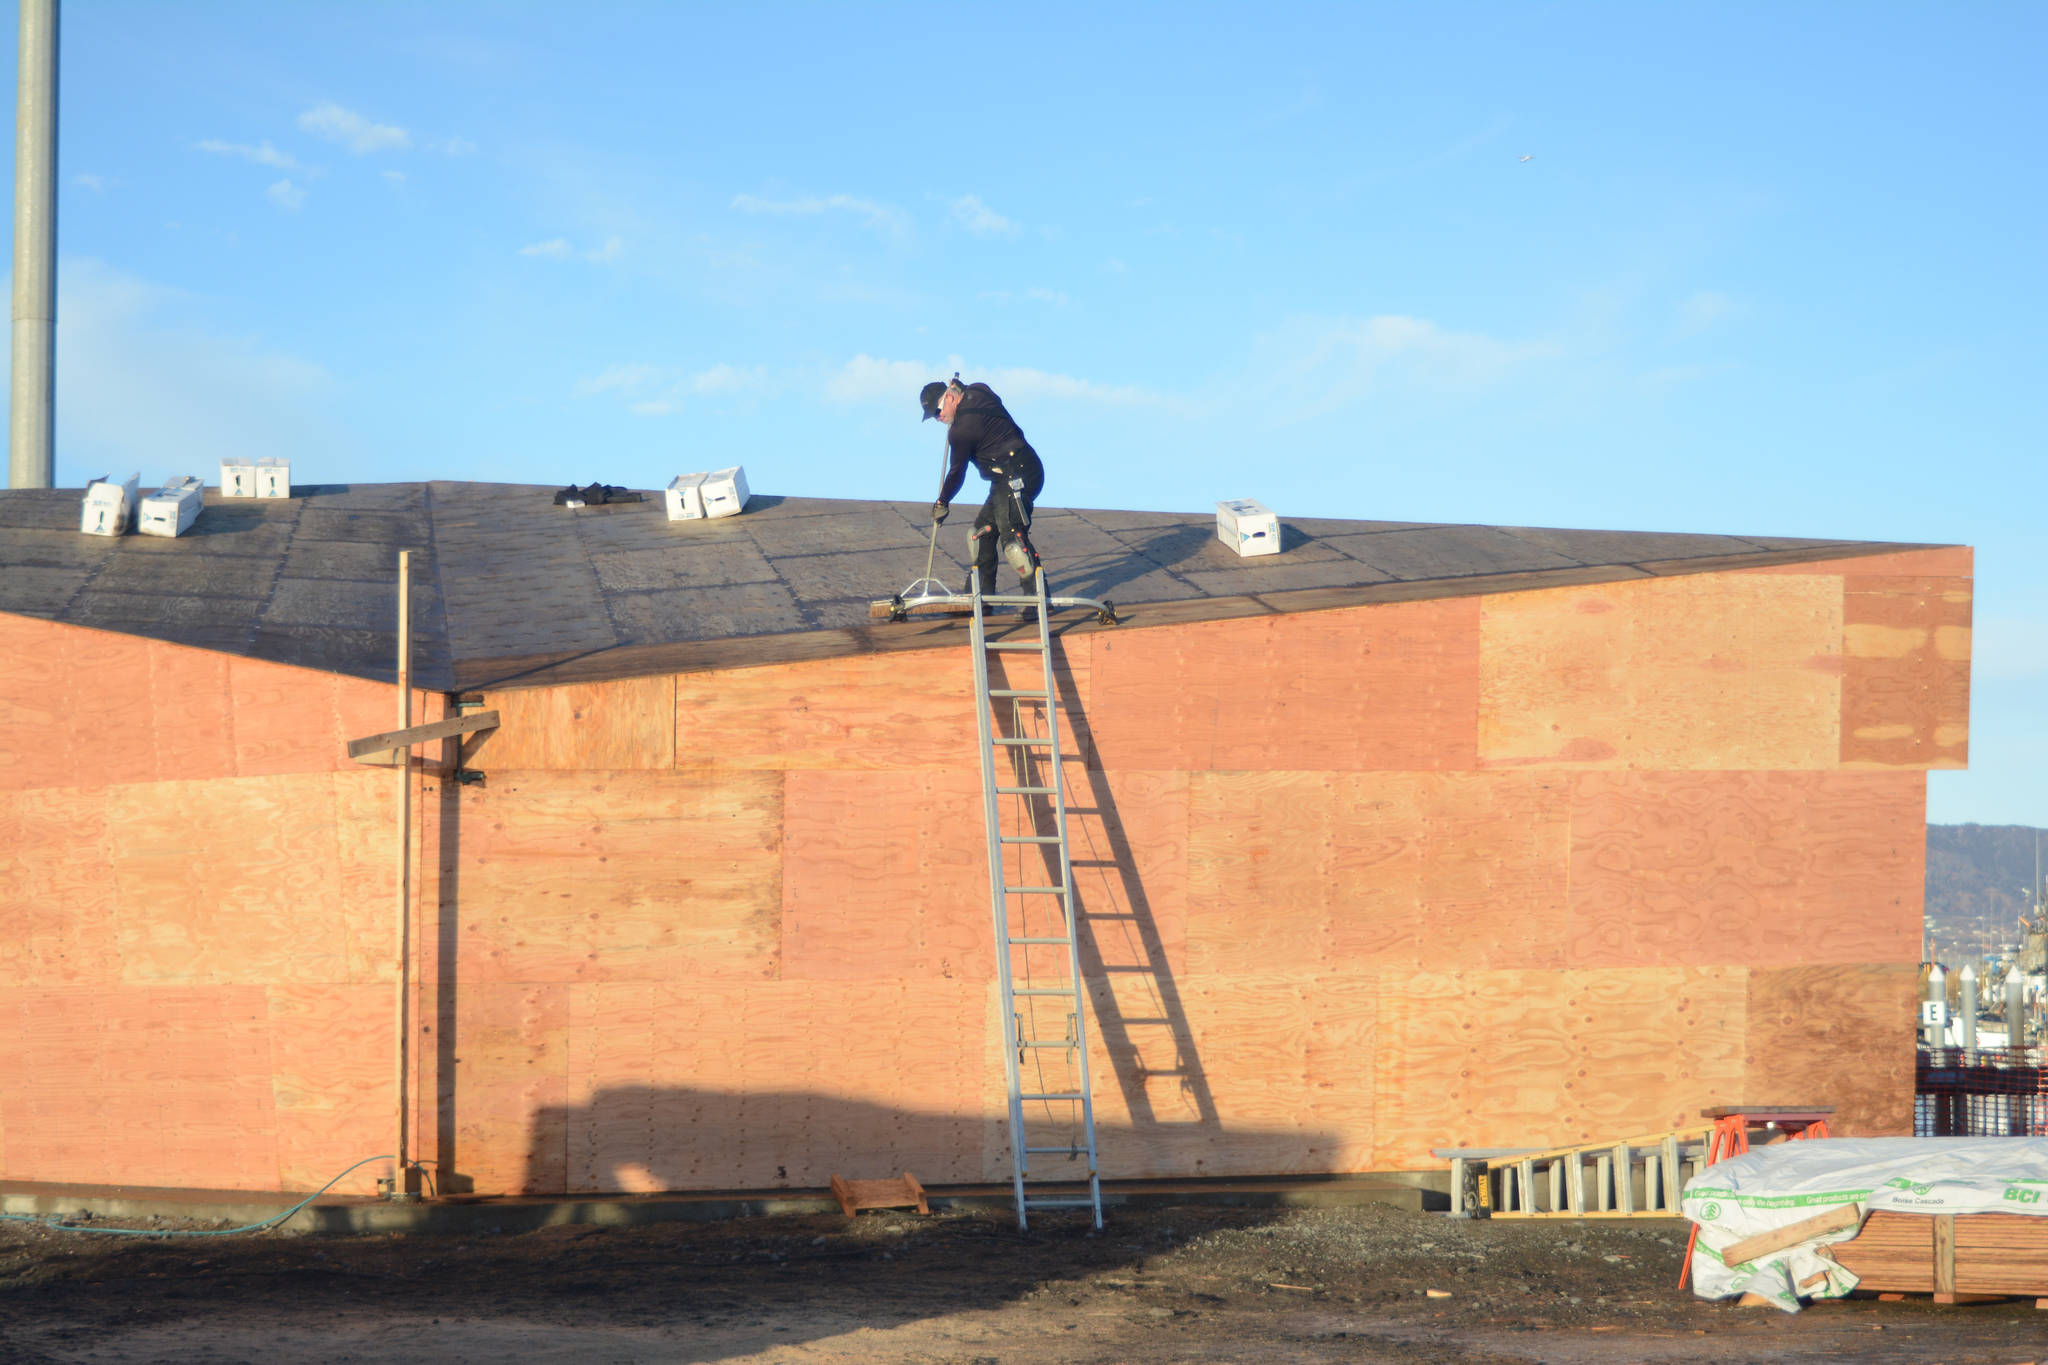 Photo by Michael Armstrong/Homer News Dave Louk of Last Frontier Roofing works last Friday on the roof of the new Boat House at the harbor near Ramp 2. The pavilion is under construction at the site of the old harbor office and when finished will provide shelter for harbor users.